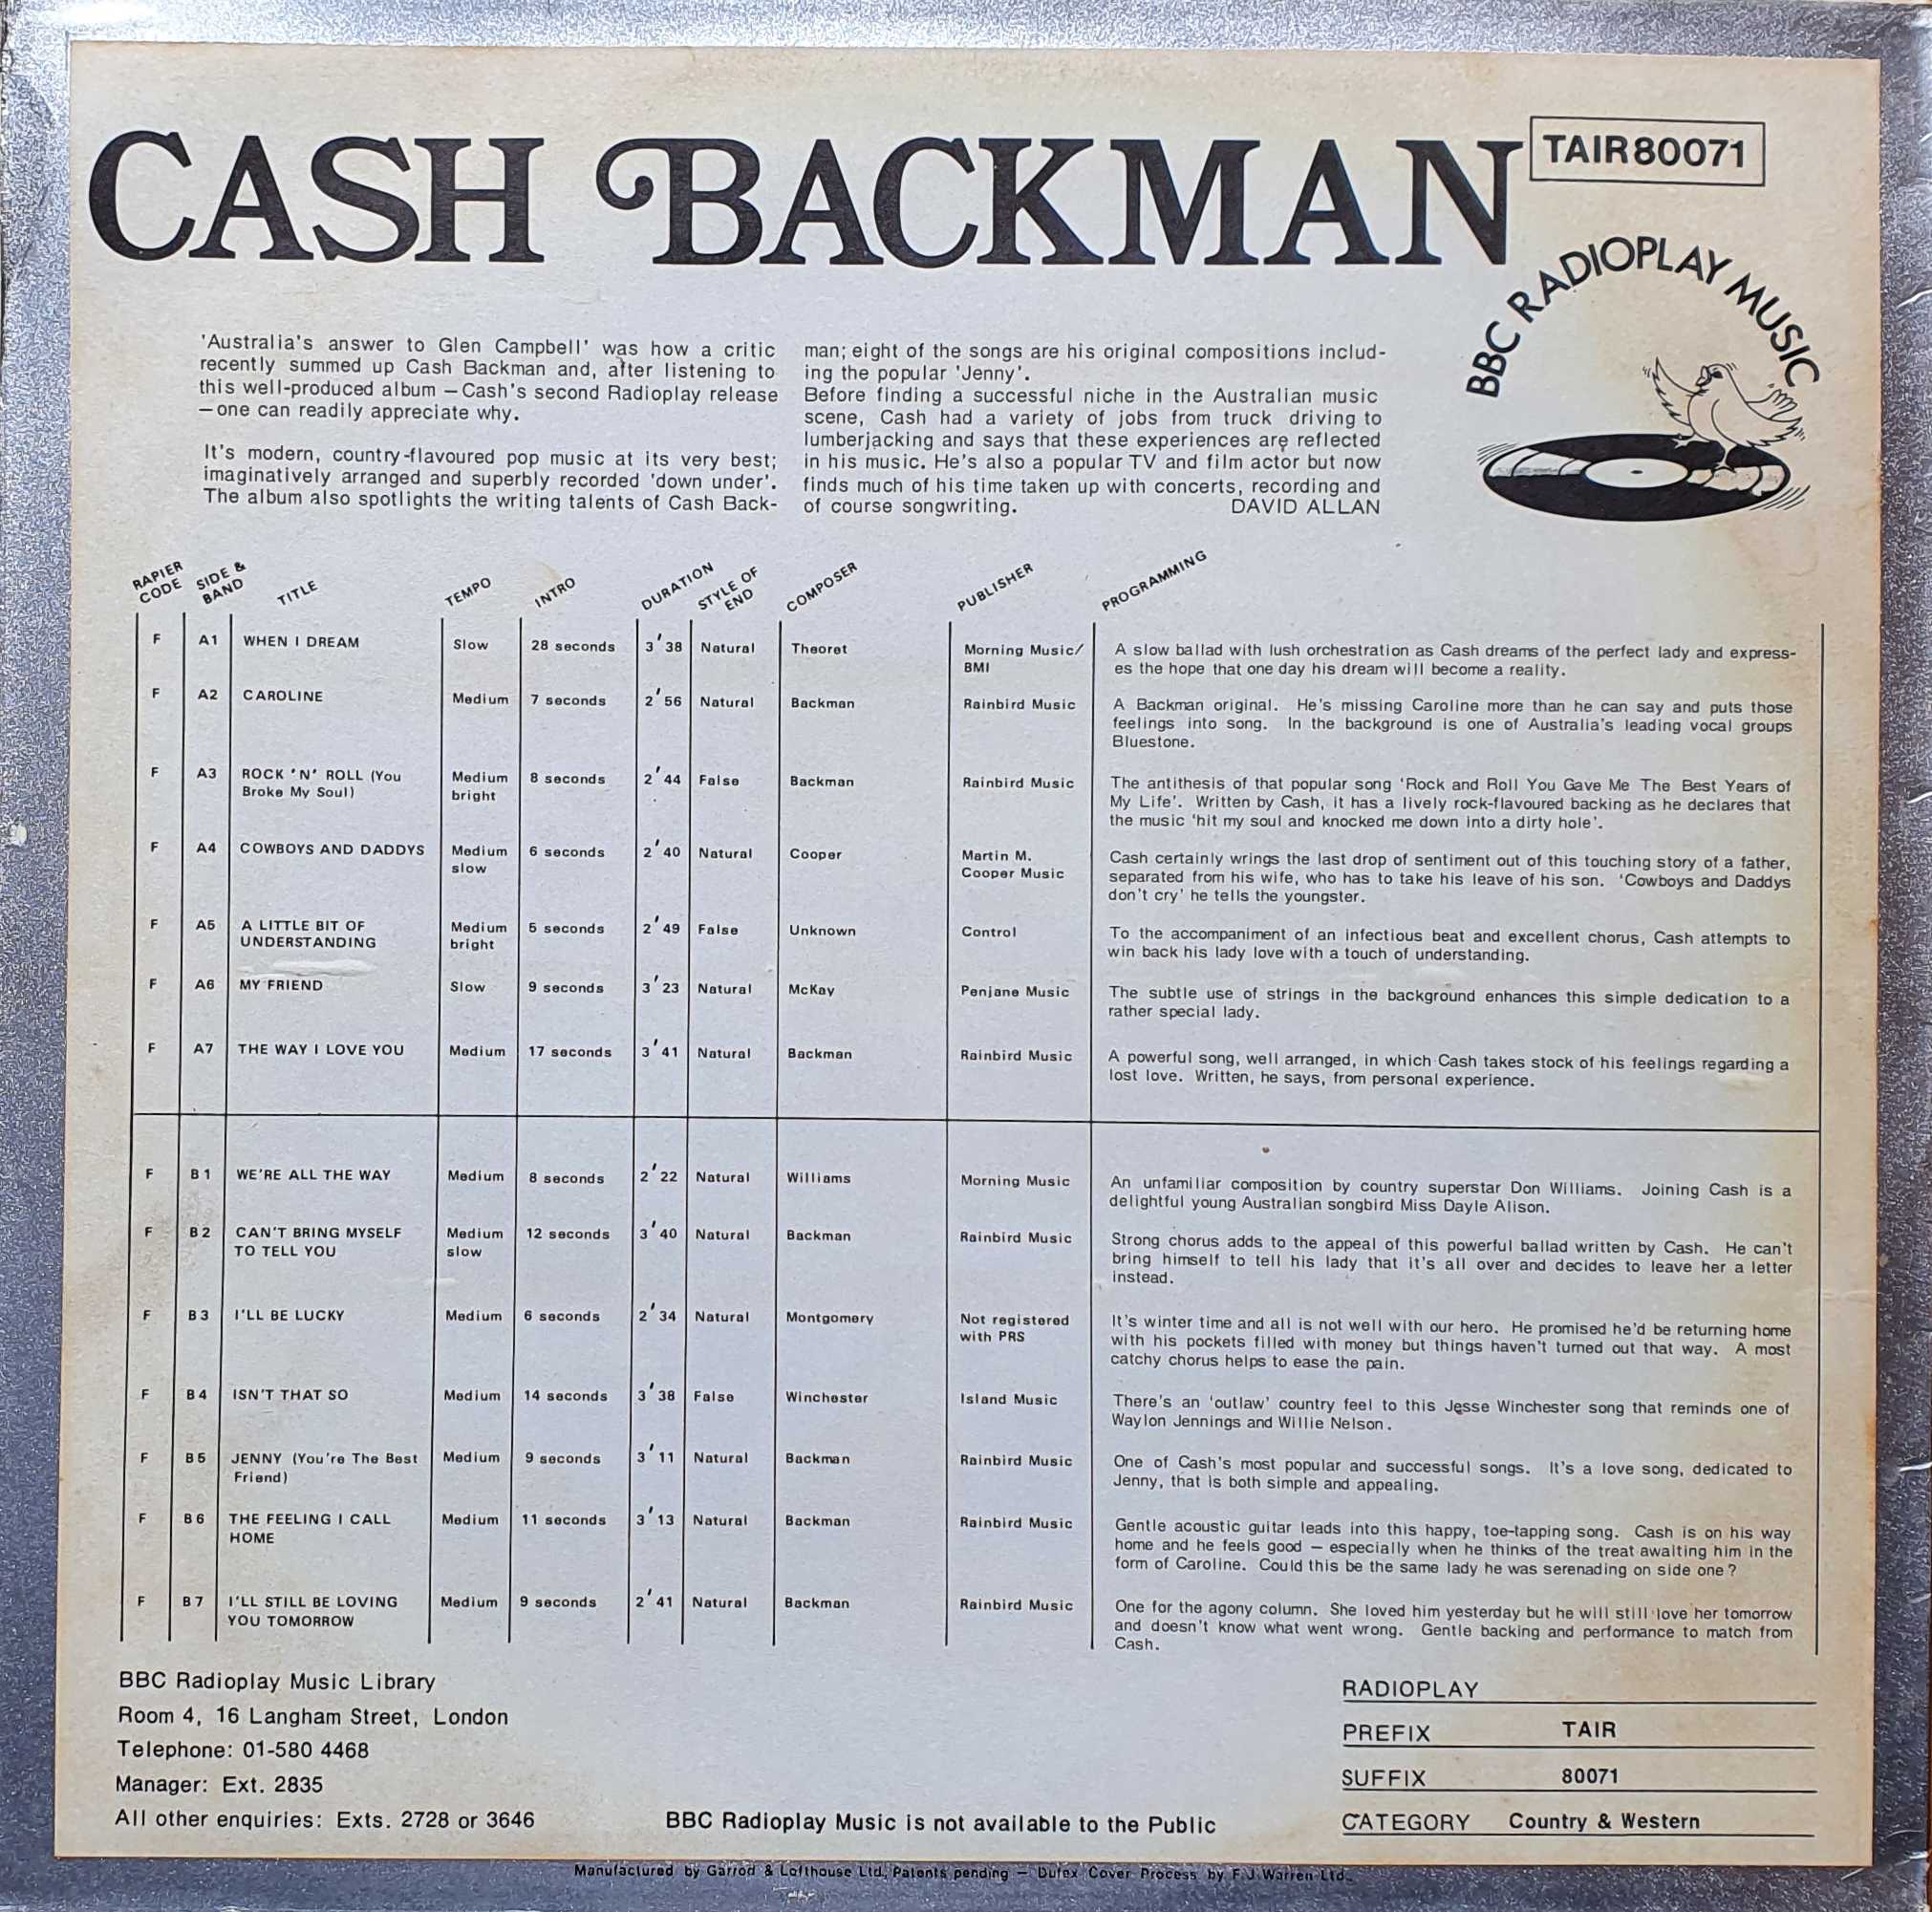 Picture of TAIR 80071 Cash Backman by artist Cash Backman from the BBC records and Tapes library